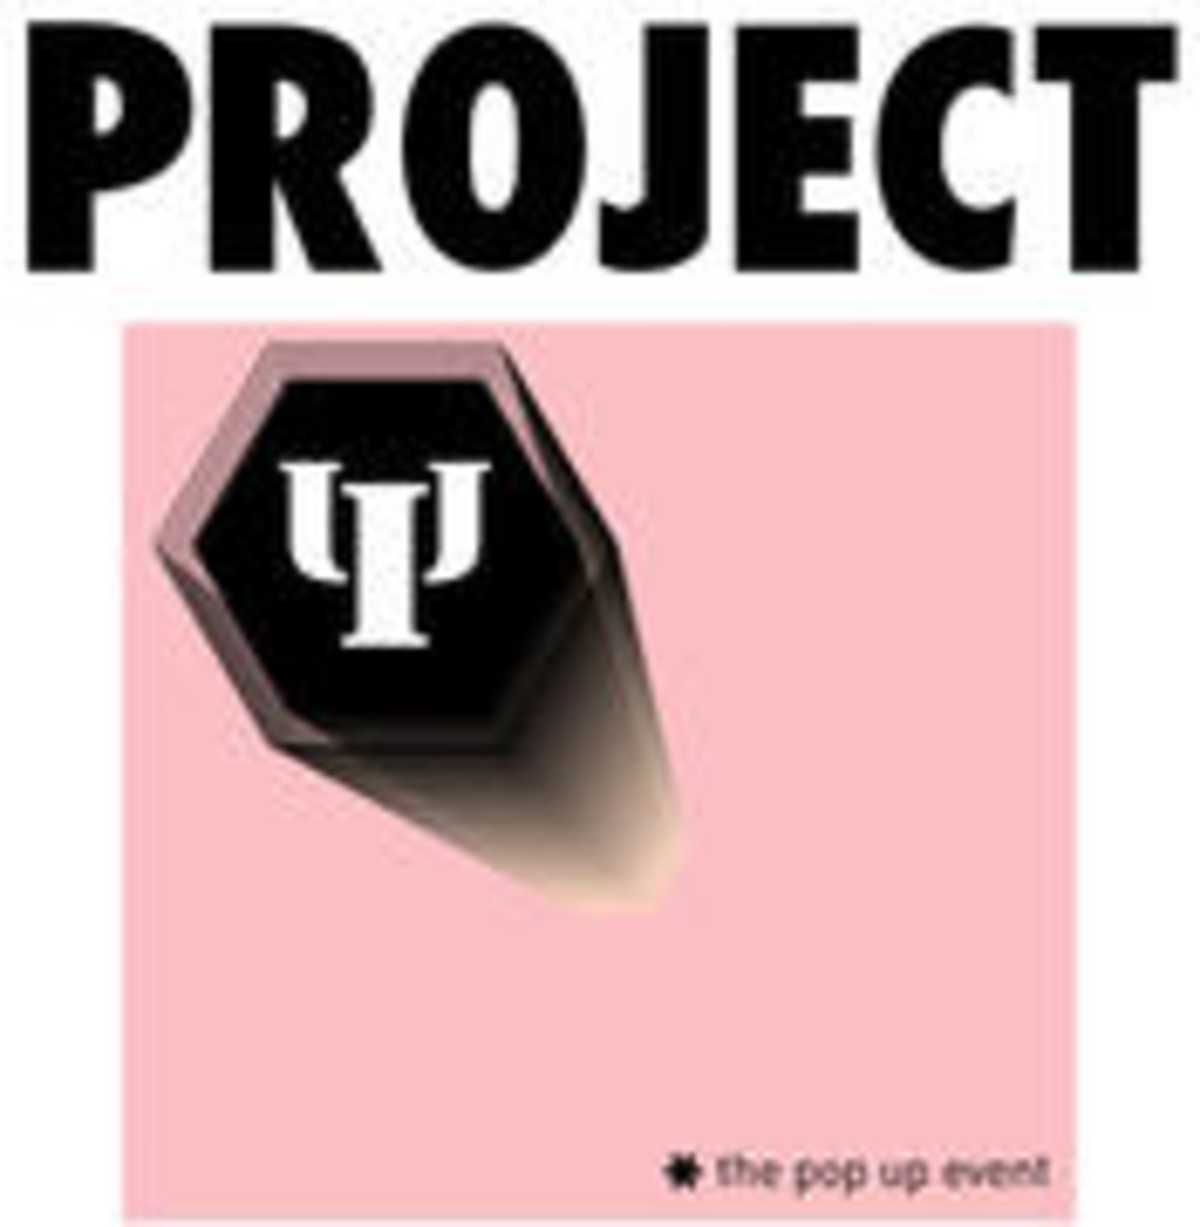 Project Ψ* - Pop up Event